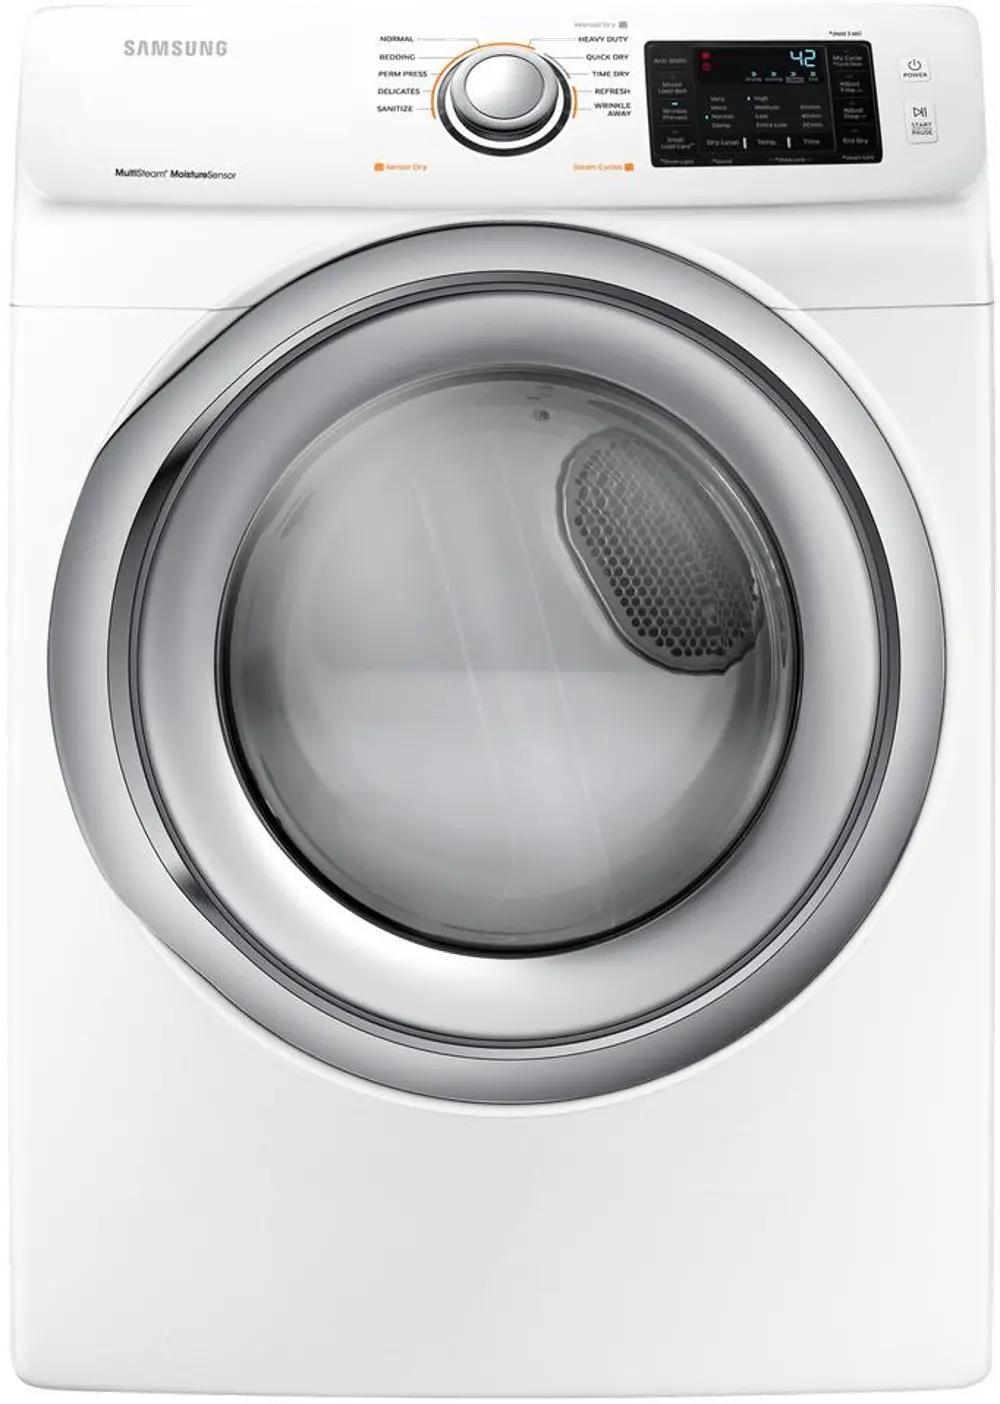 DVE45N5300W Samsung Electric Dryer with Steam - 7.5 cu. ft. White-1